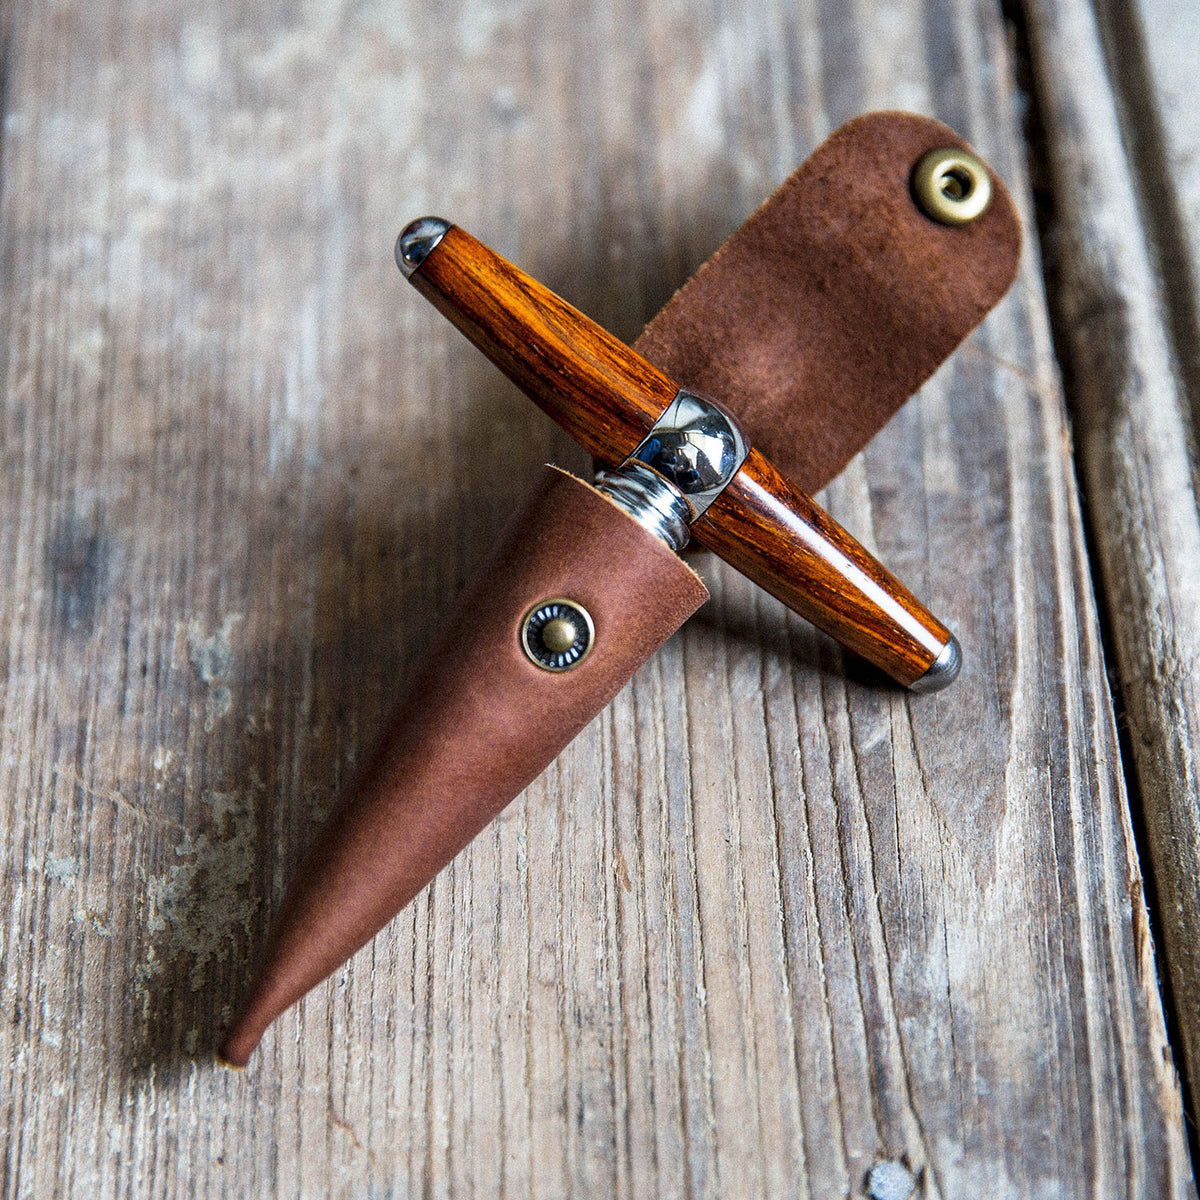 The Vino Personalized Hand Turned Wine Bottle Stopper Corkscrew &amp; Leather Sleeve